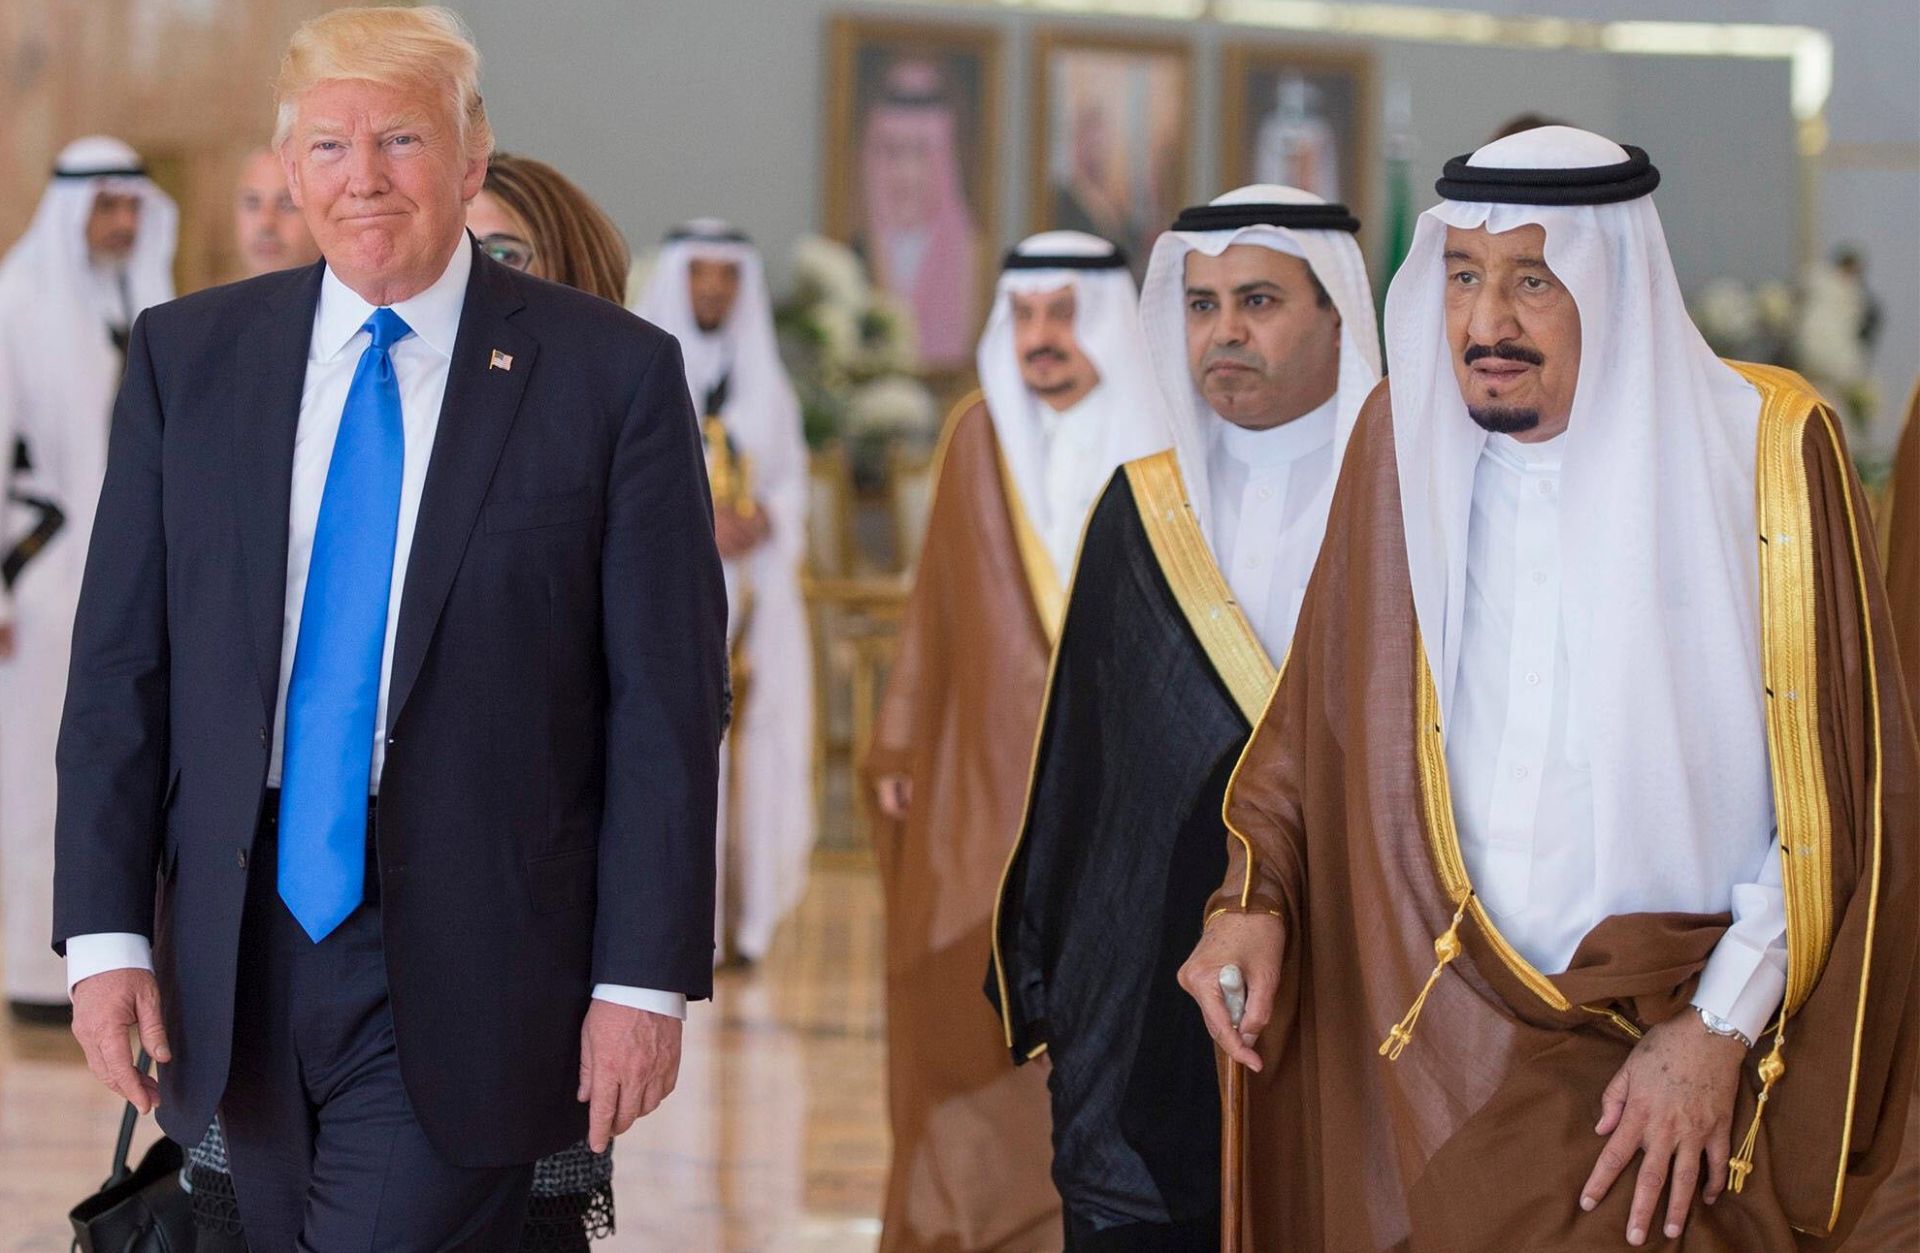 epa05976128 A handout photo made available by the Saudi Press Agency shows US President Donald J. Trump (L) after being welcomed by Saudi Arabia's King Salman bin Abdulaziz Al Saud (R) at King Khalid International Airport in Riyadh, Saudi Arabia, 20 May 2017. Trump is on an official visit to Saudi Arabia, the first stop of his first foreign trip since taking office in January 2017.  EPA/SAUDI PRESS AGENCY HANDOUT  HANDOUT EDITORIAL USE ONLY/NO SALES HANDOUT EDITORIAL USE ONLY/NO SALES